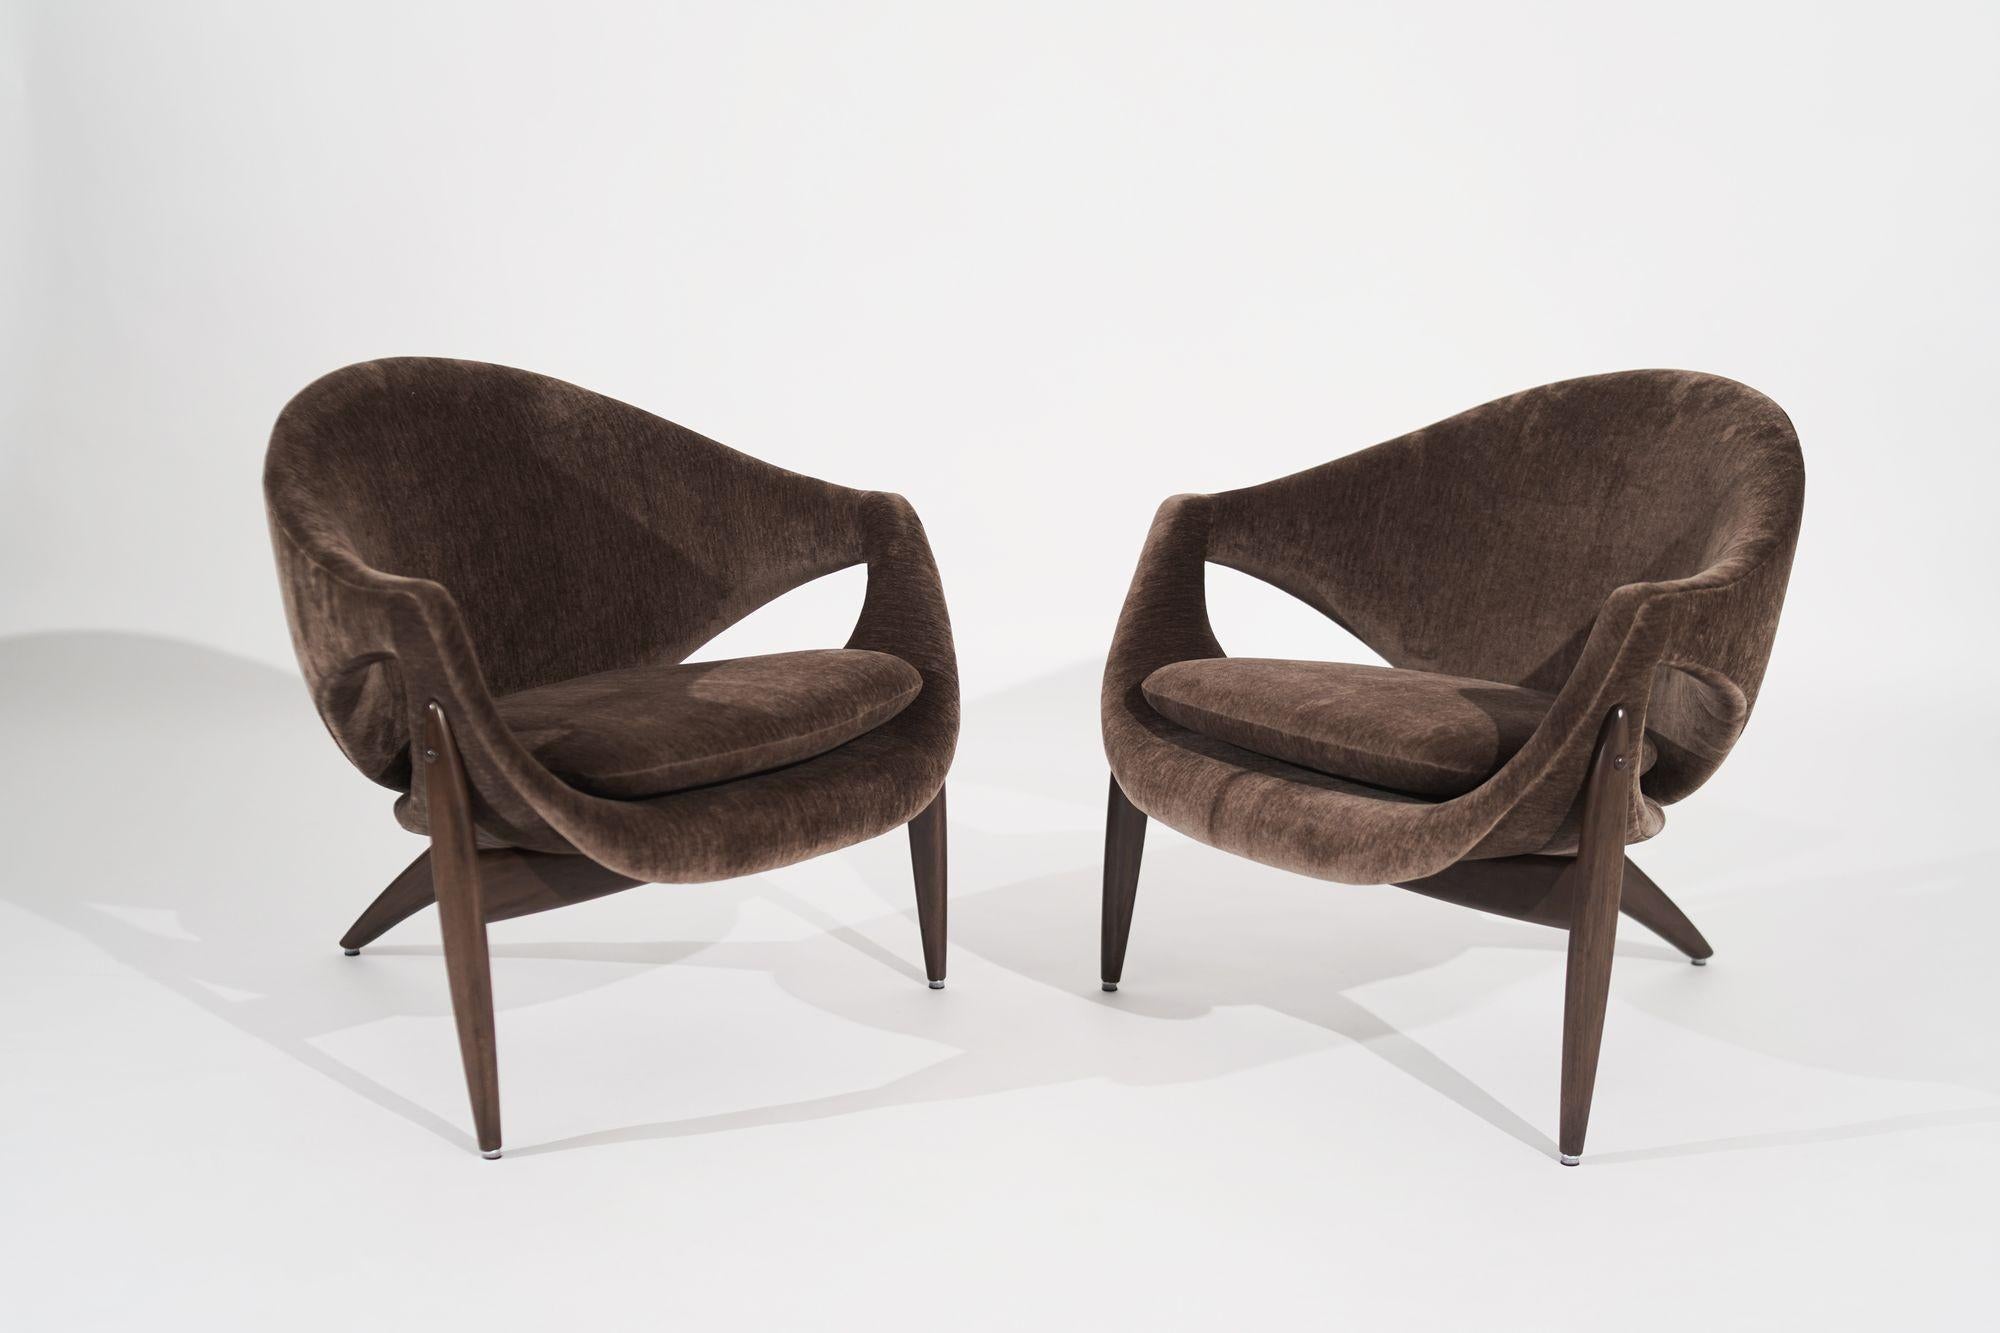 Canadian Sculptural Lounge Chairs by Luigi Tiengo for Cimon, Canada, C. 1960s